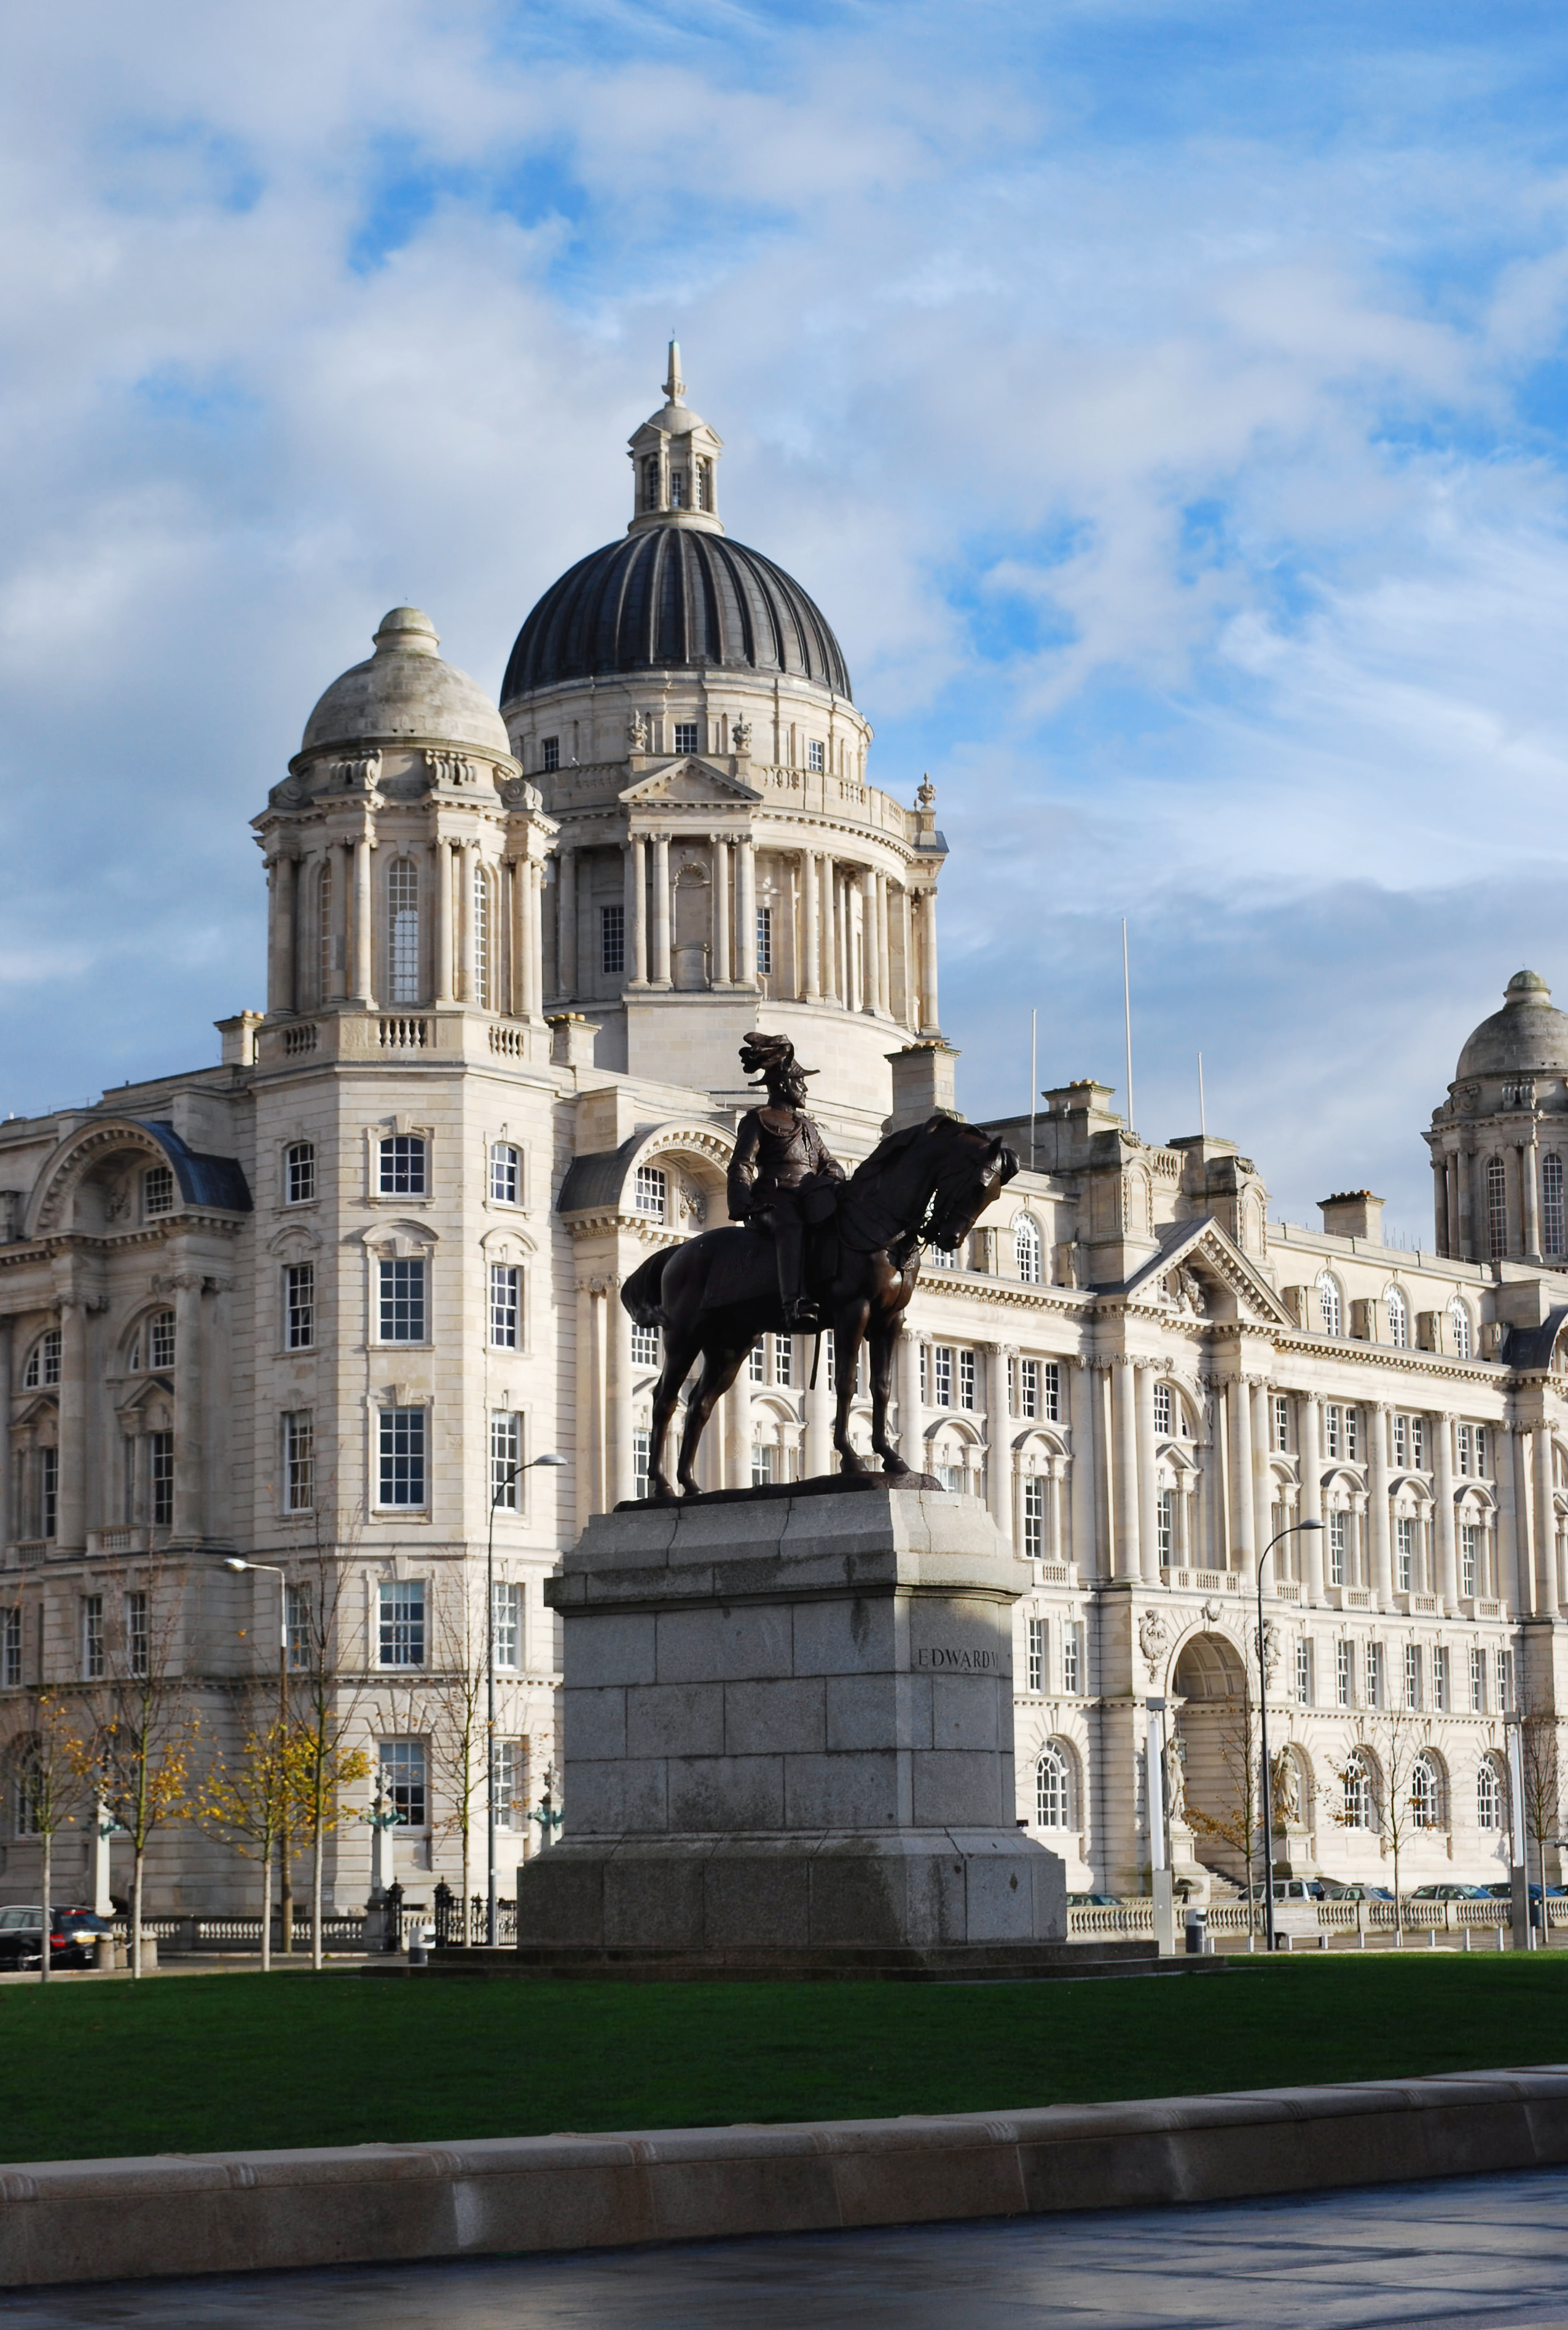 Port of Liverpool Building and statue of King Edward VII